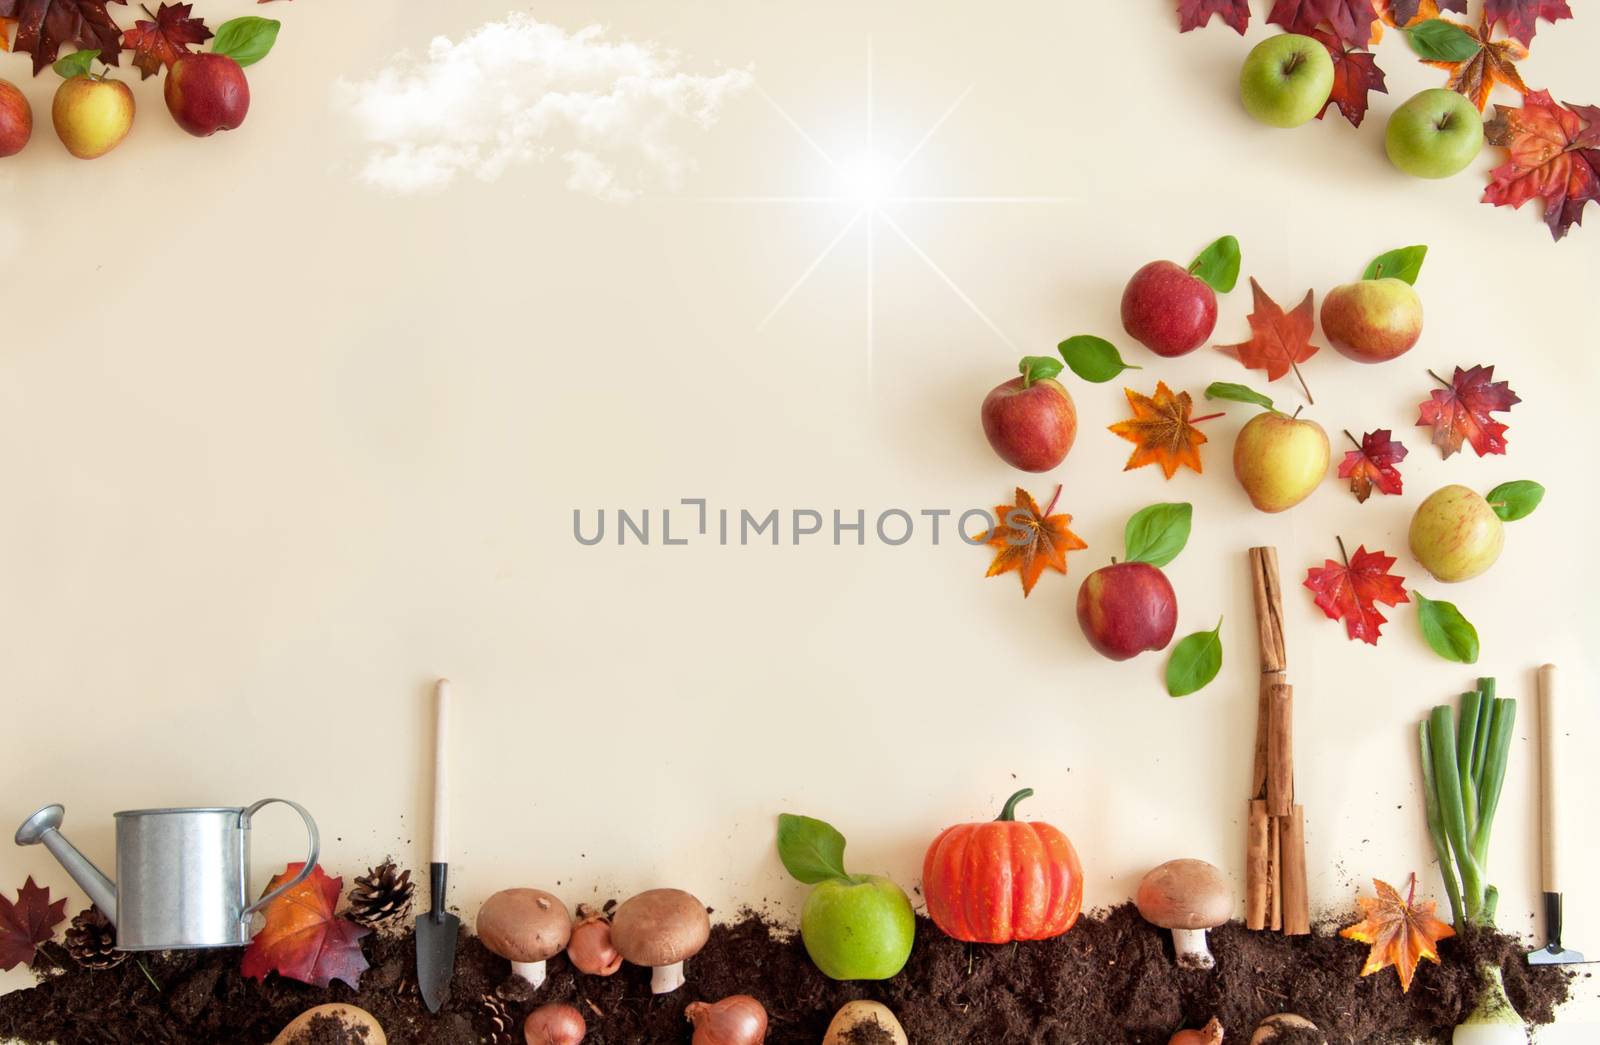 Autumn fruits growing in soil patch with apple tree and space